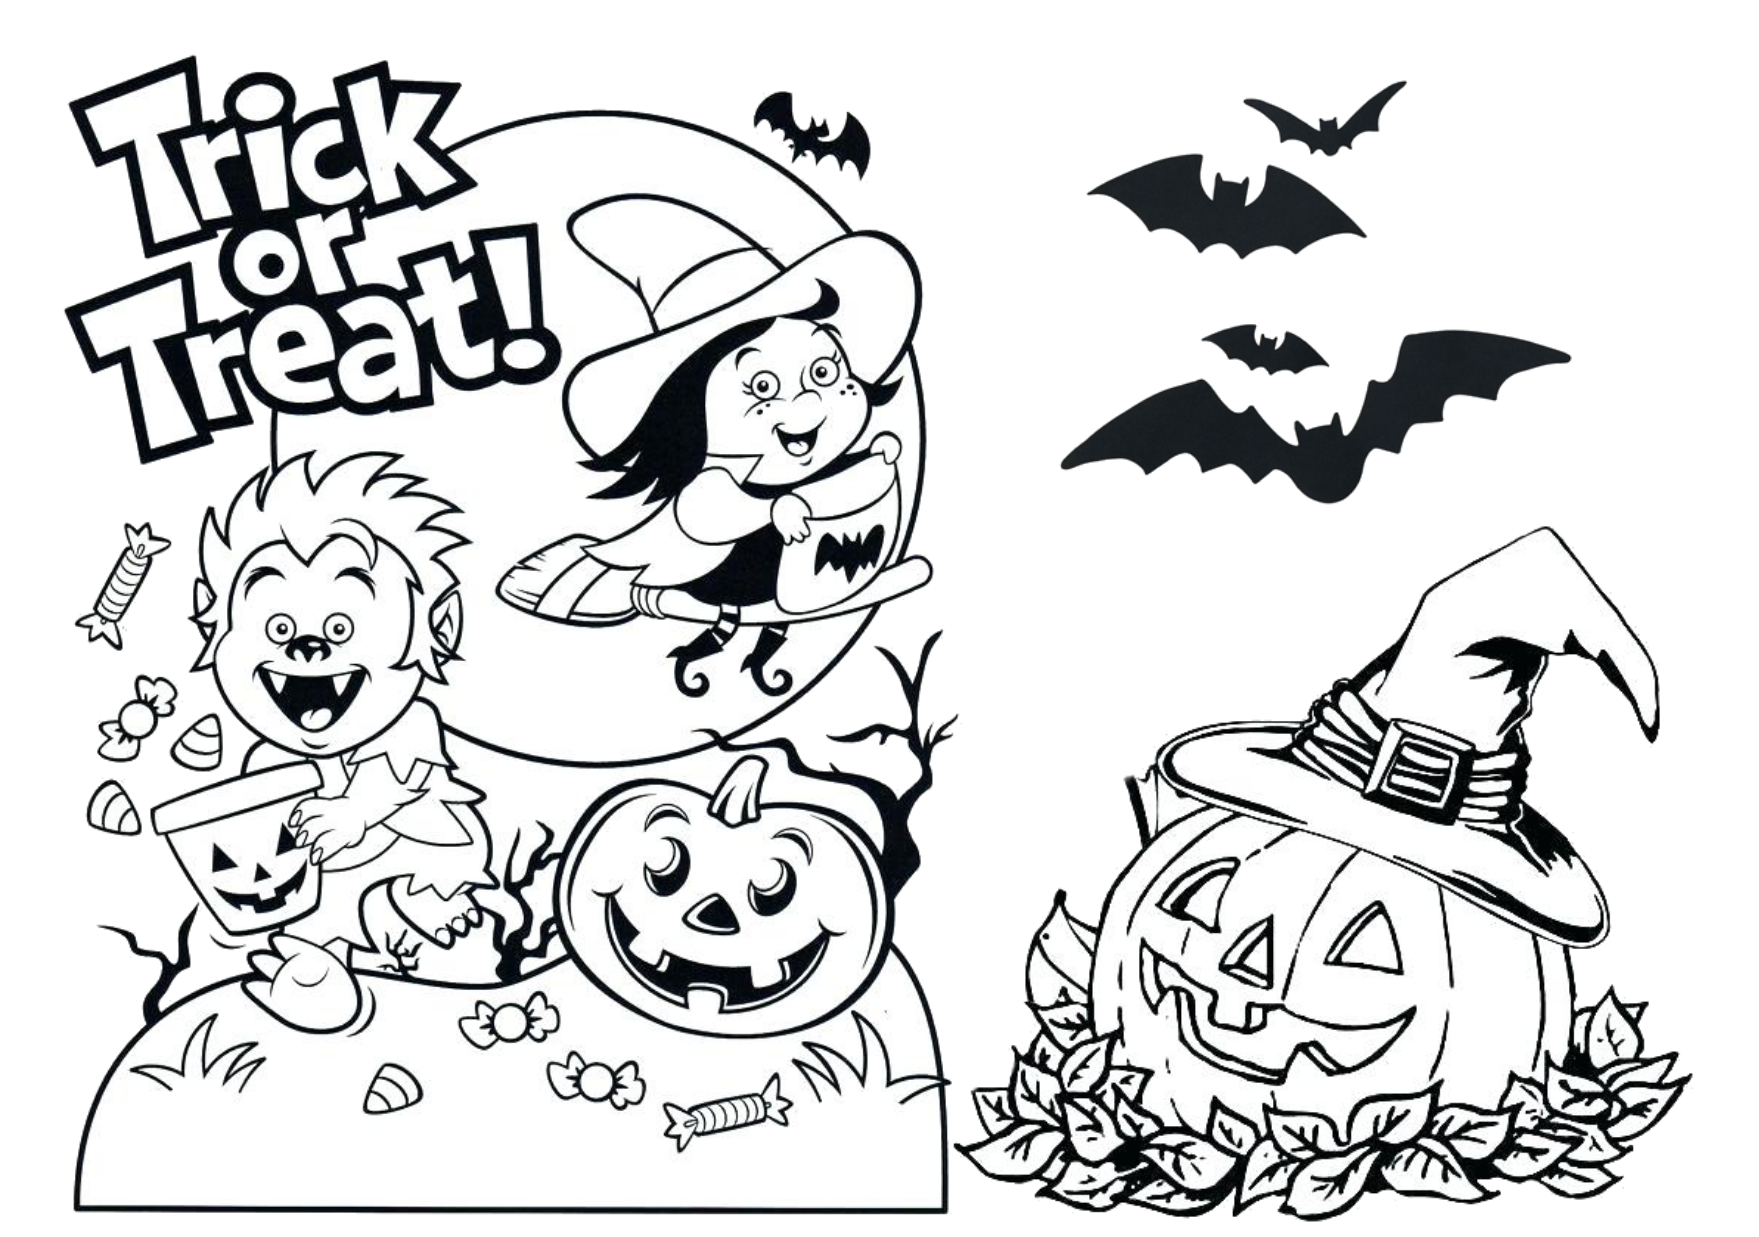 Trick or treat free printable coloring pages. Wallpaper